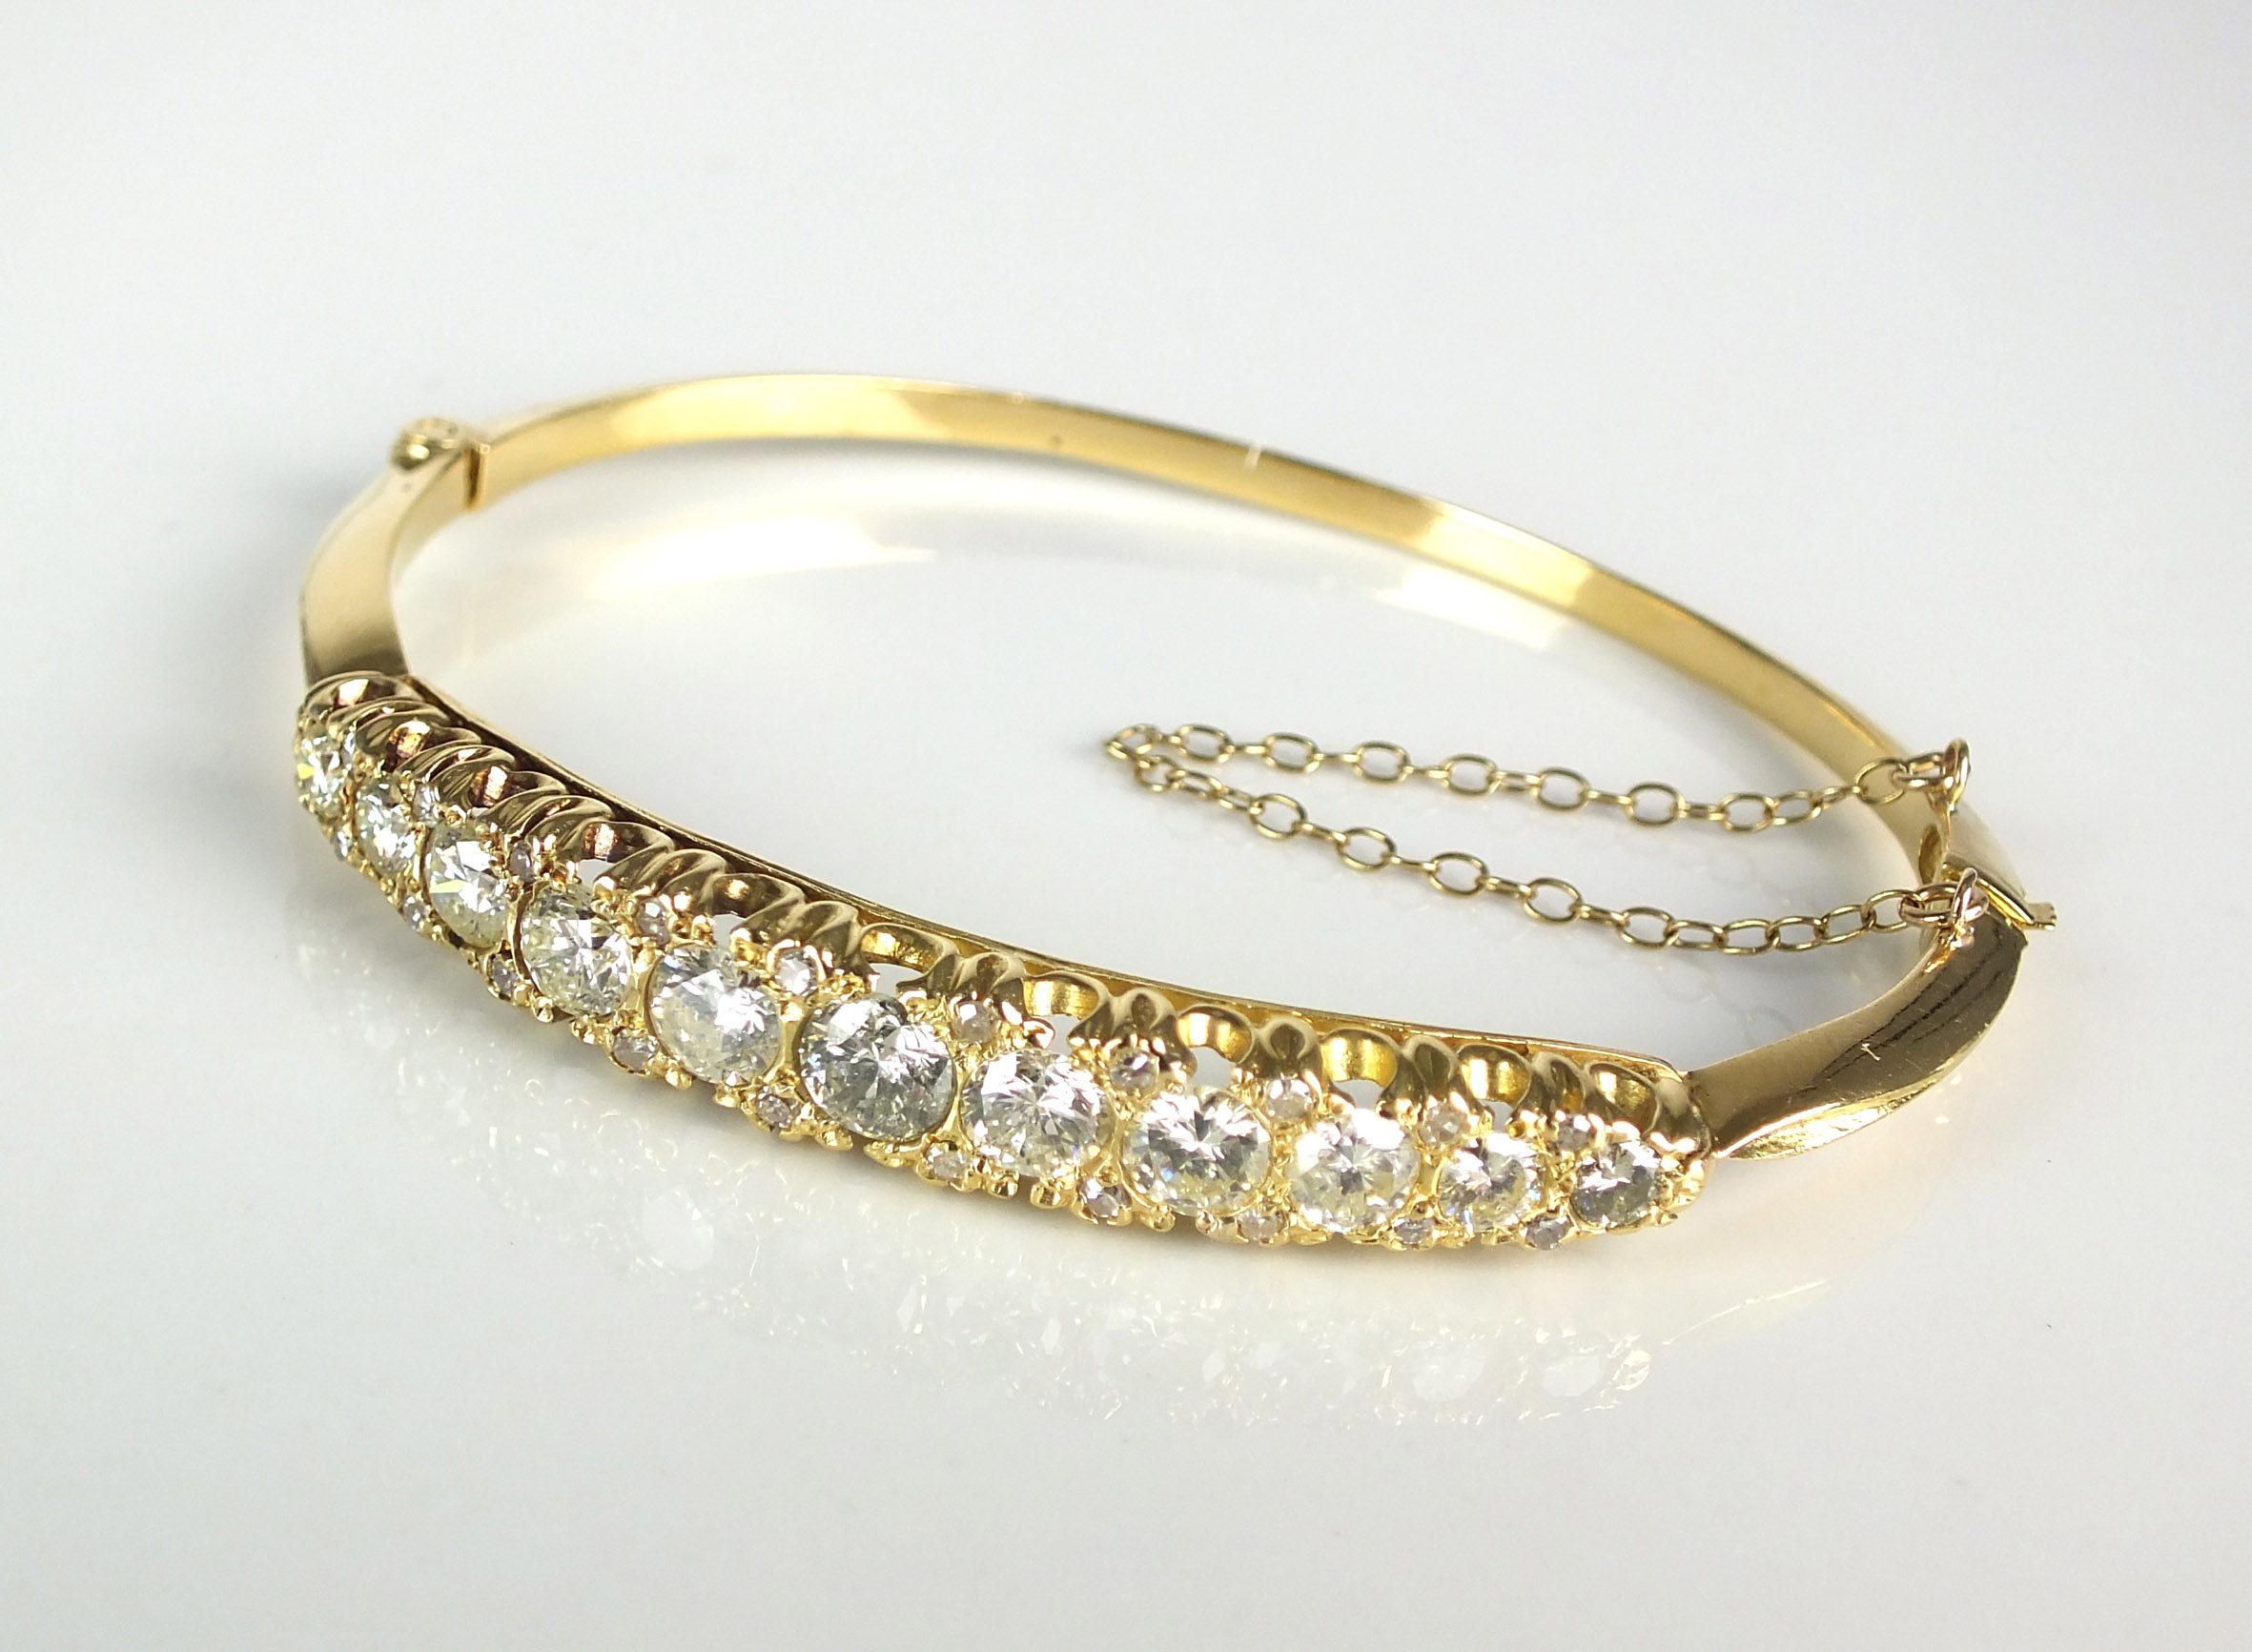 Victorian style diamond set hinged bangle sold for £1,200